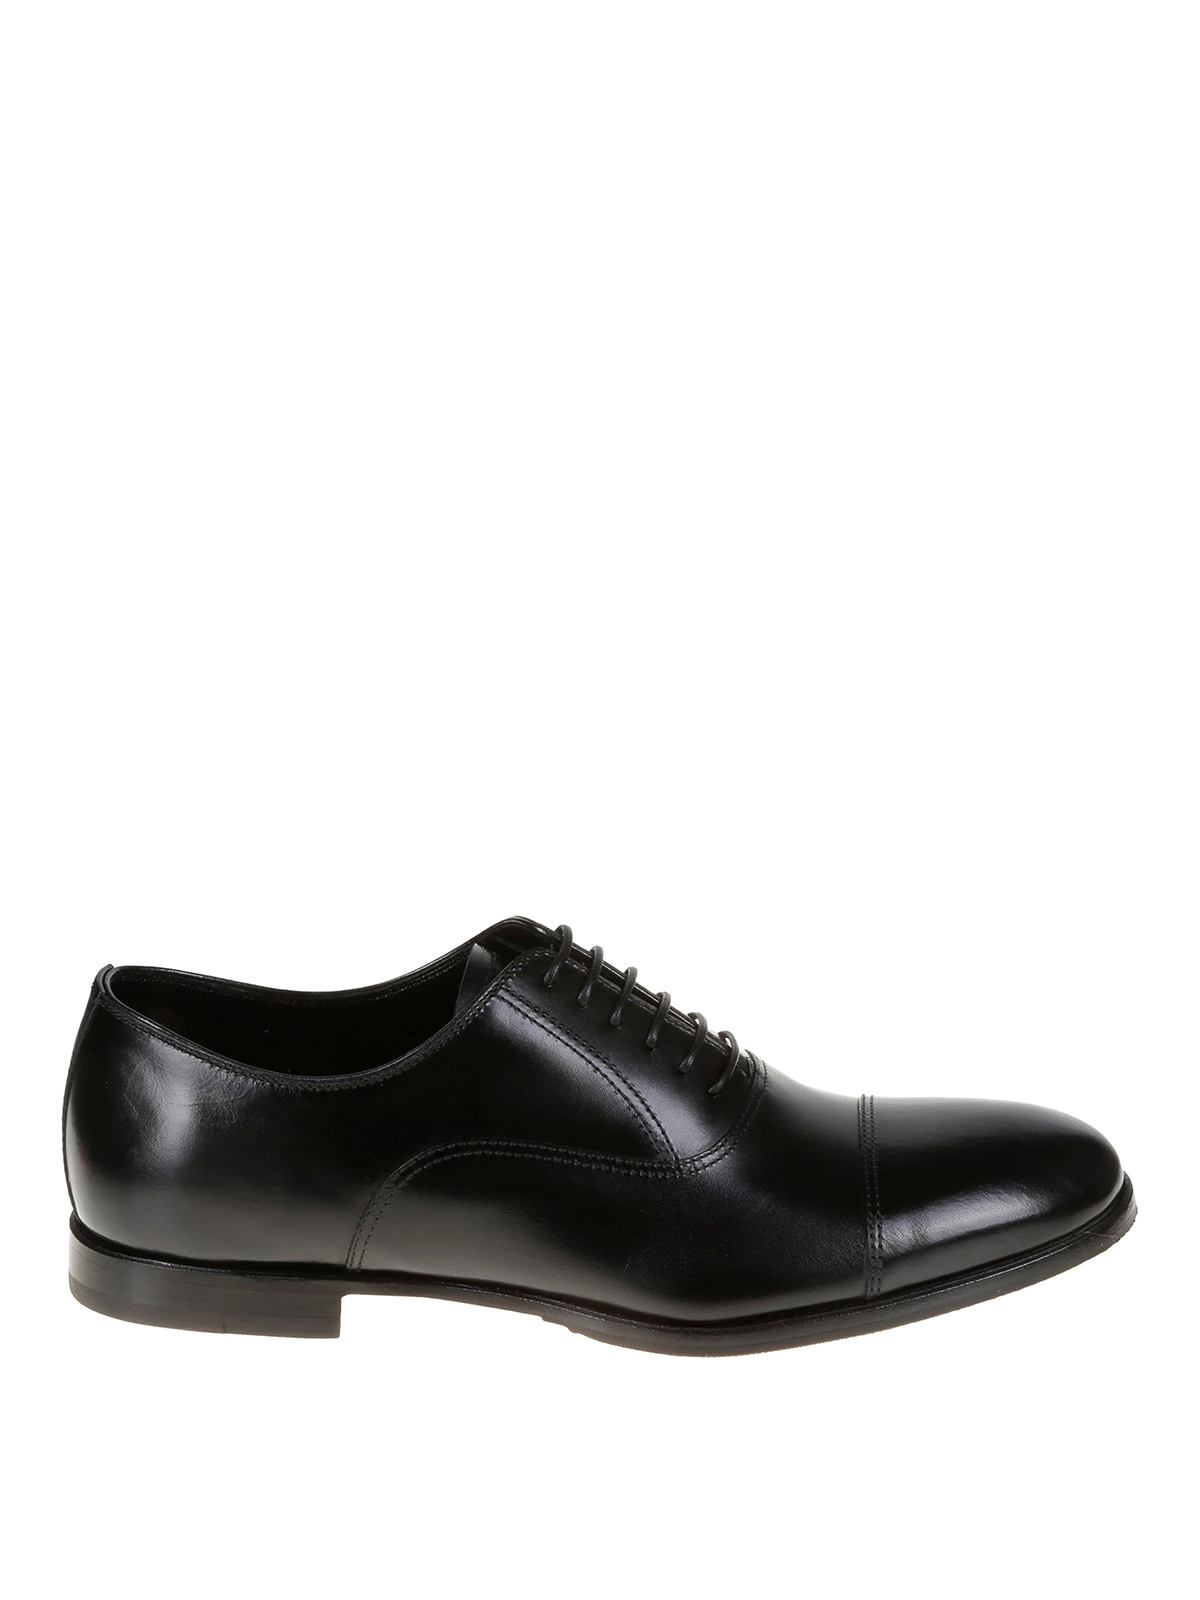 Classic shoes Neil Barrett - Leather Oxford shoes with leather sole ...